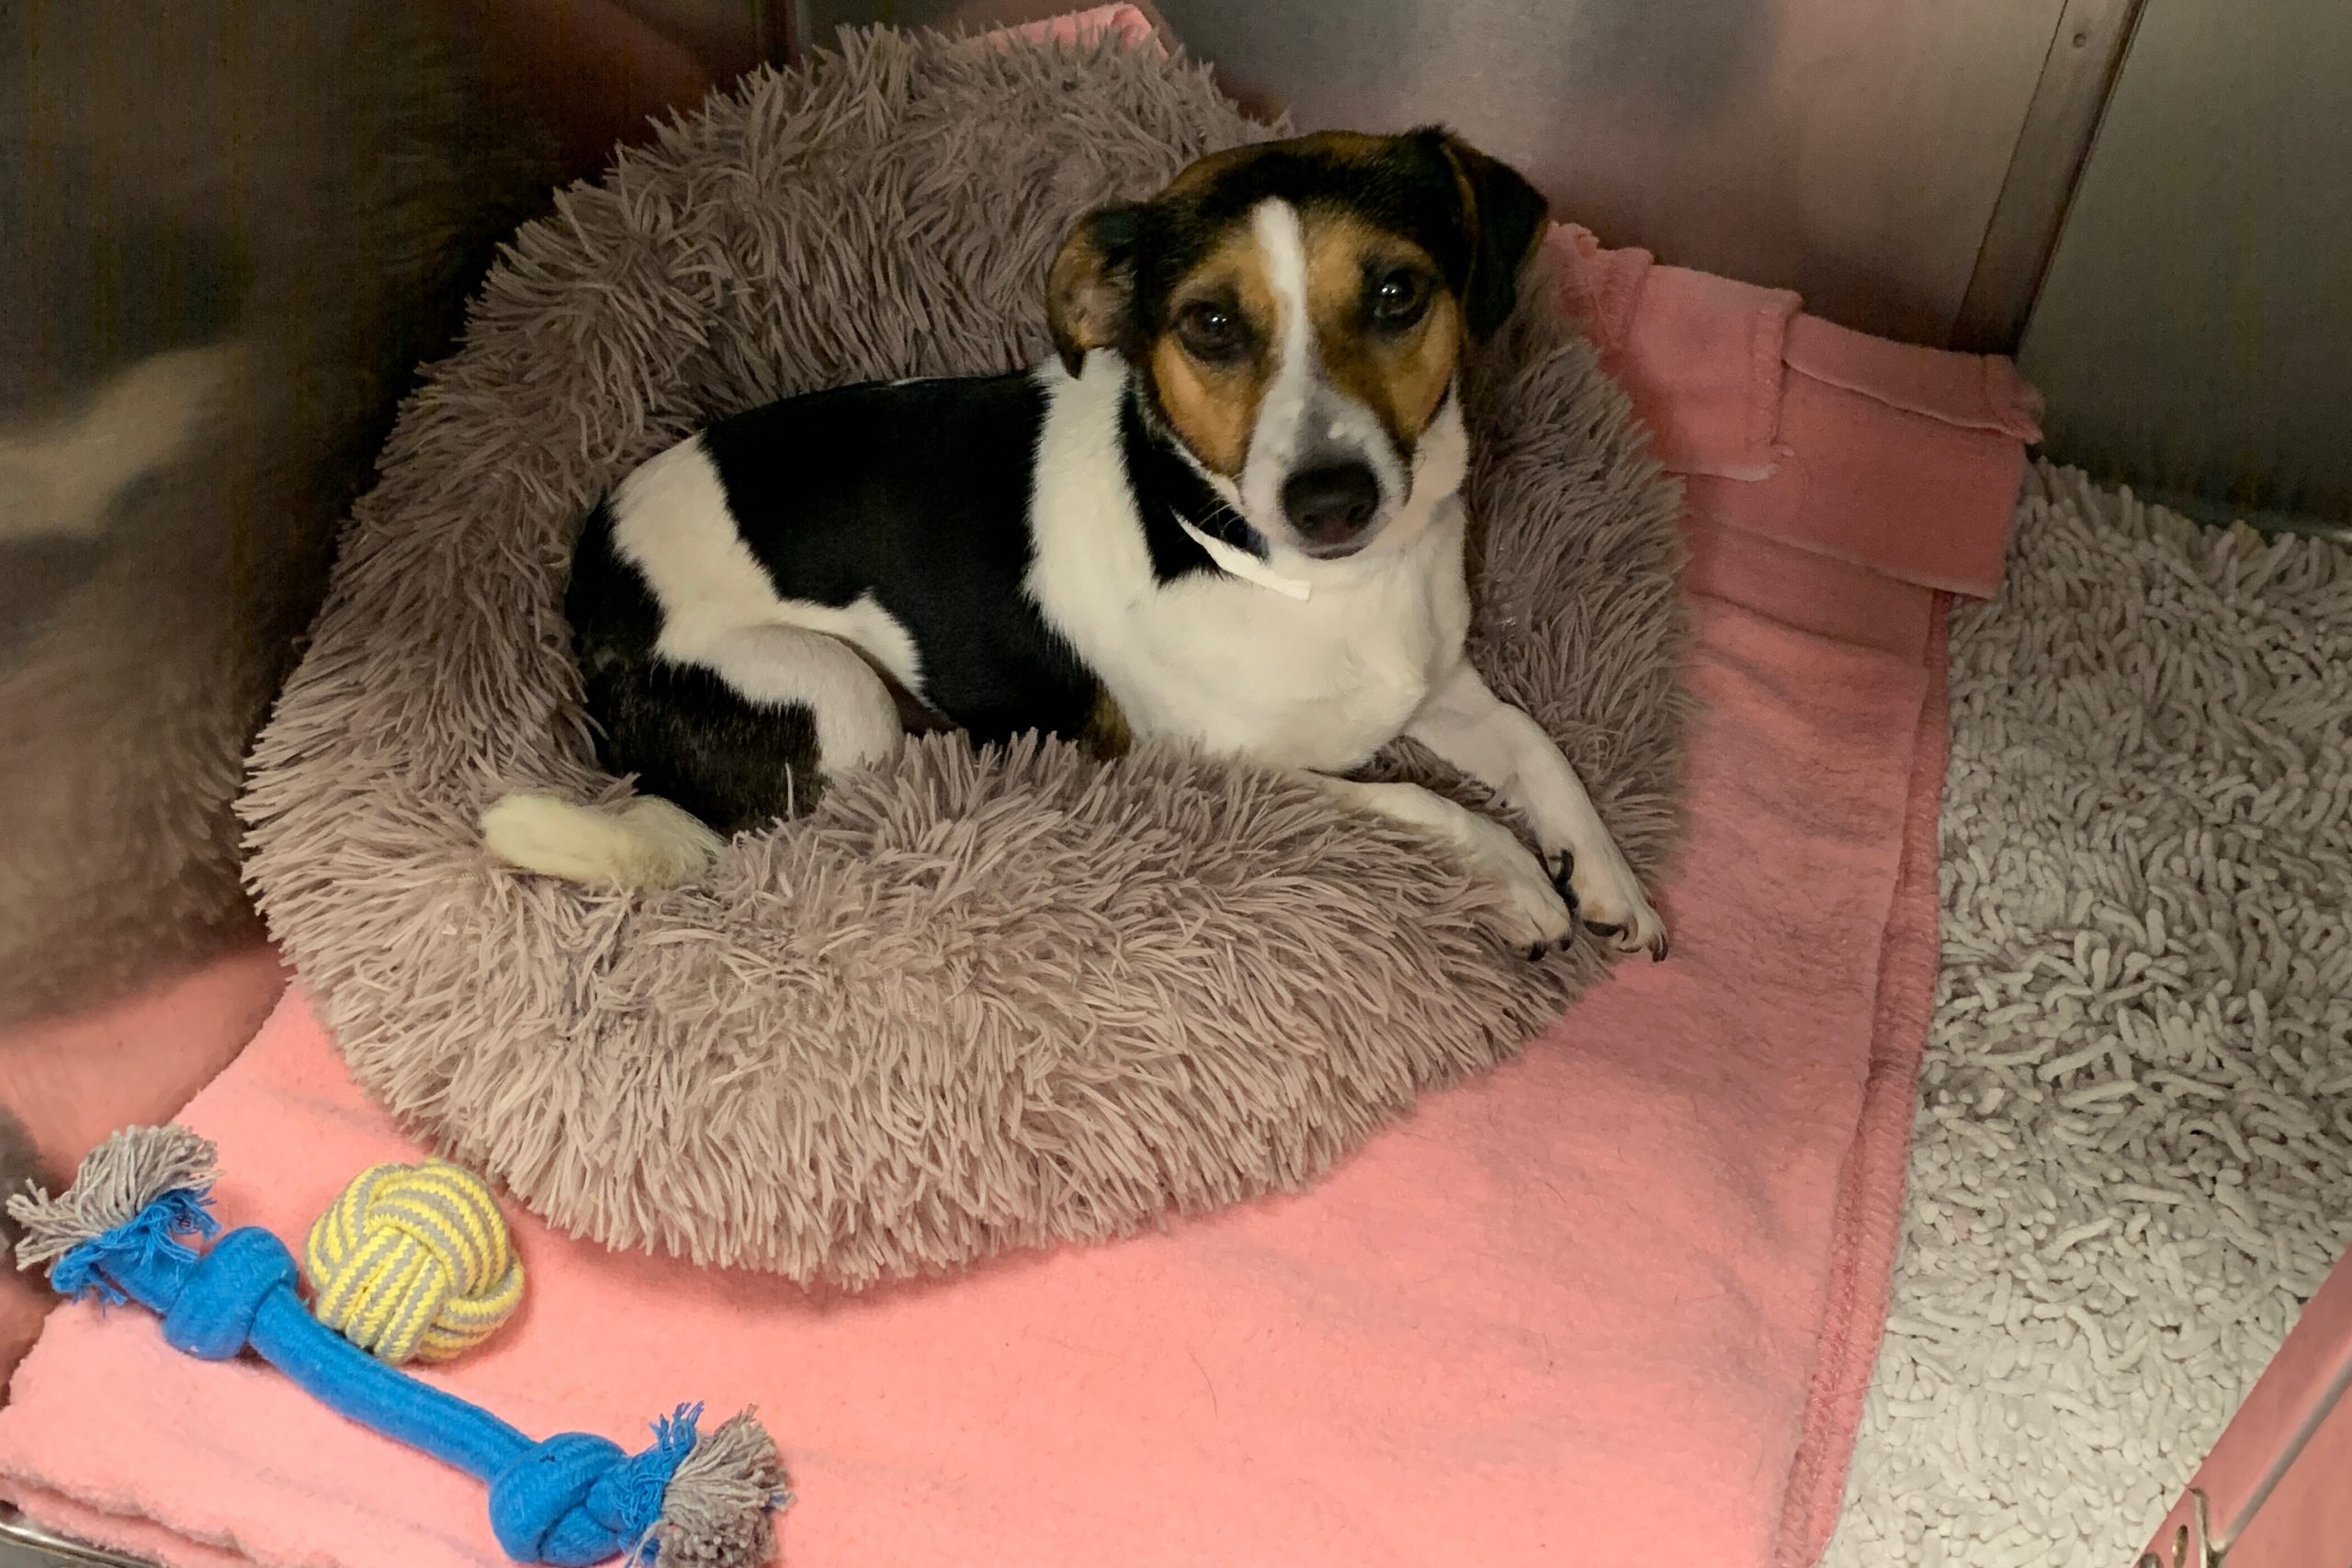 Rosie the 18-month-old Jack Russell terrier in her bed at RSPCA Putney Animal Hospital